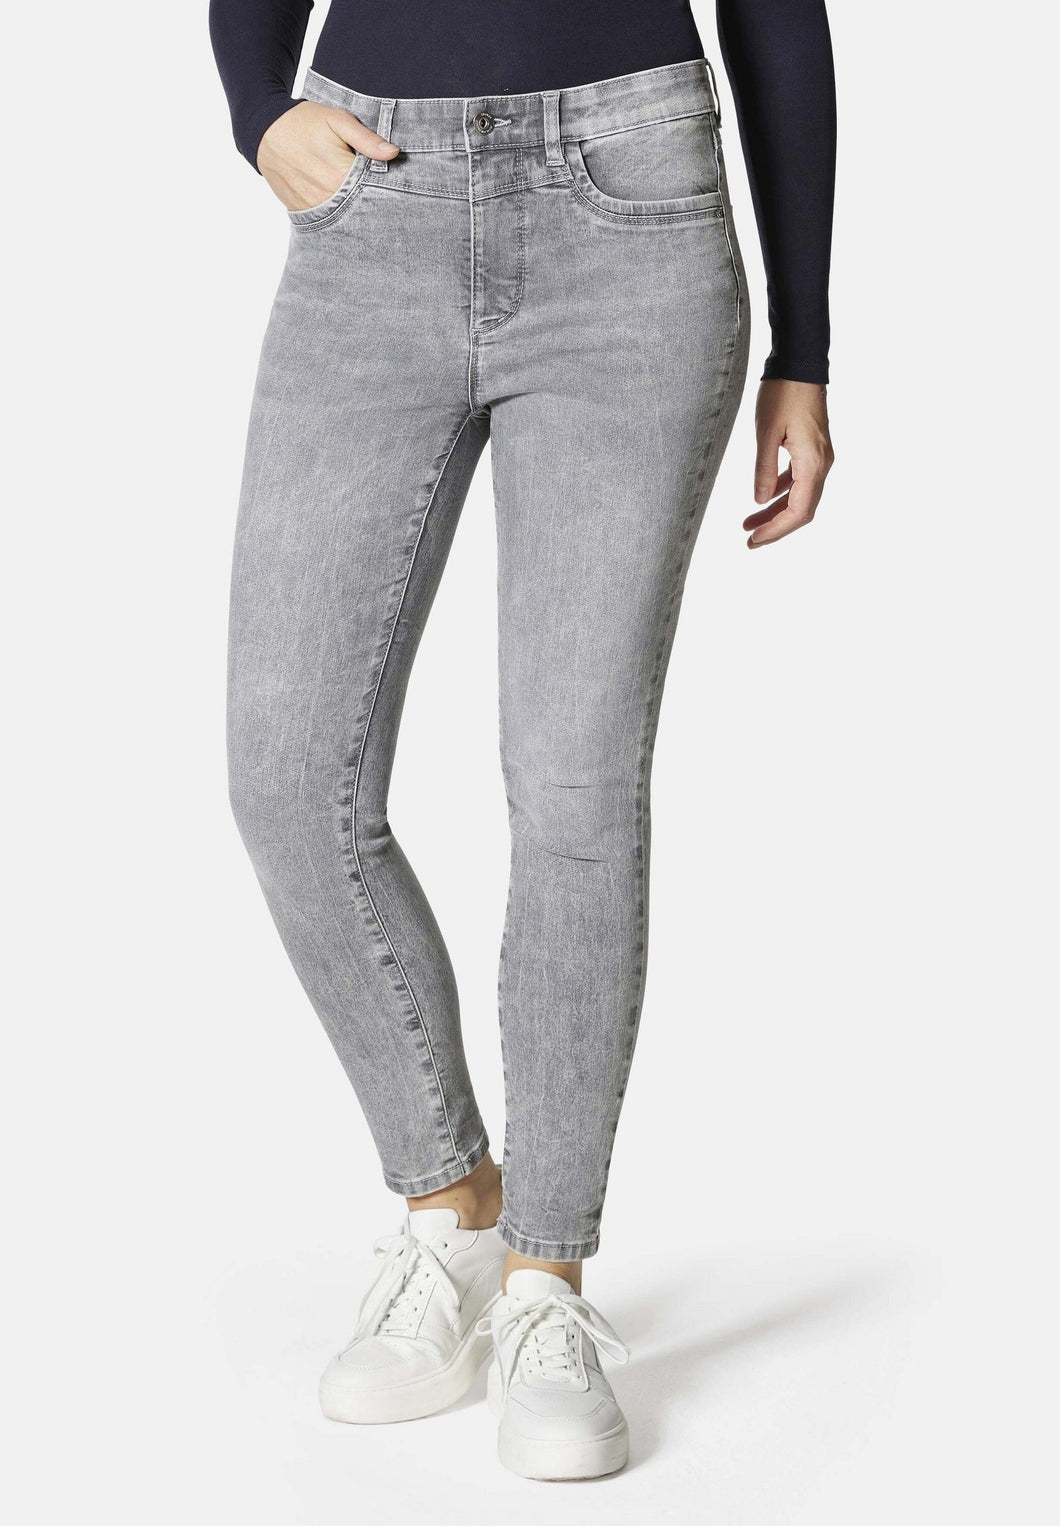 STOOKER RIO DAMEN STRETCH JEANS HOSE - FEXXI MOVE STRASS SKINNY FIT - Grey bleached